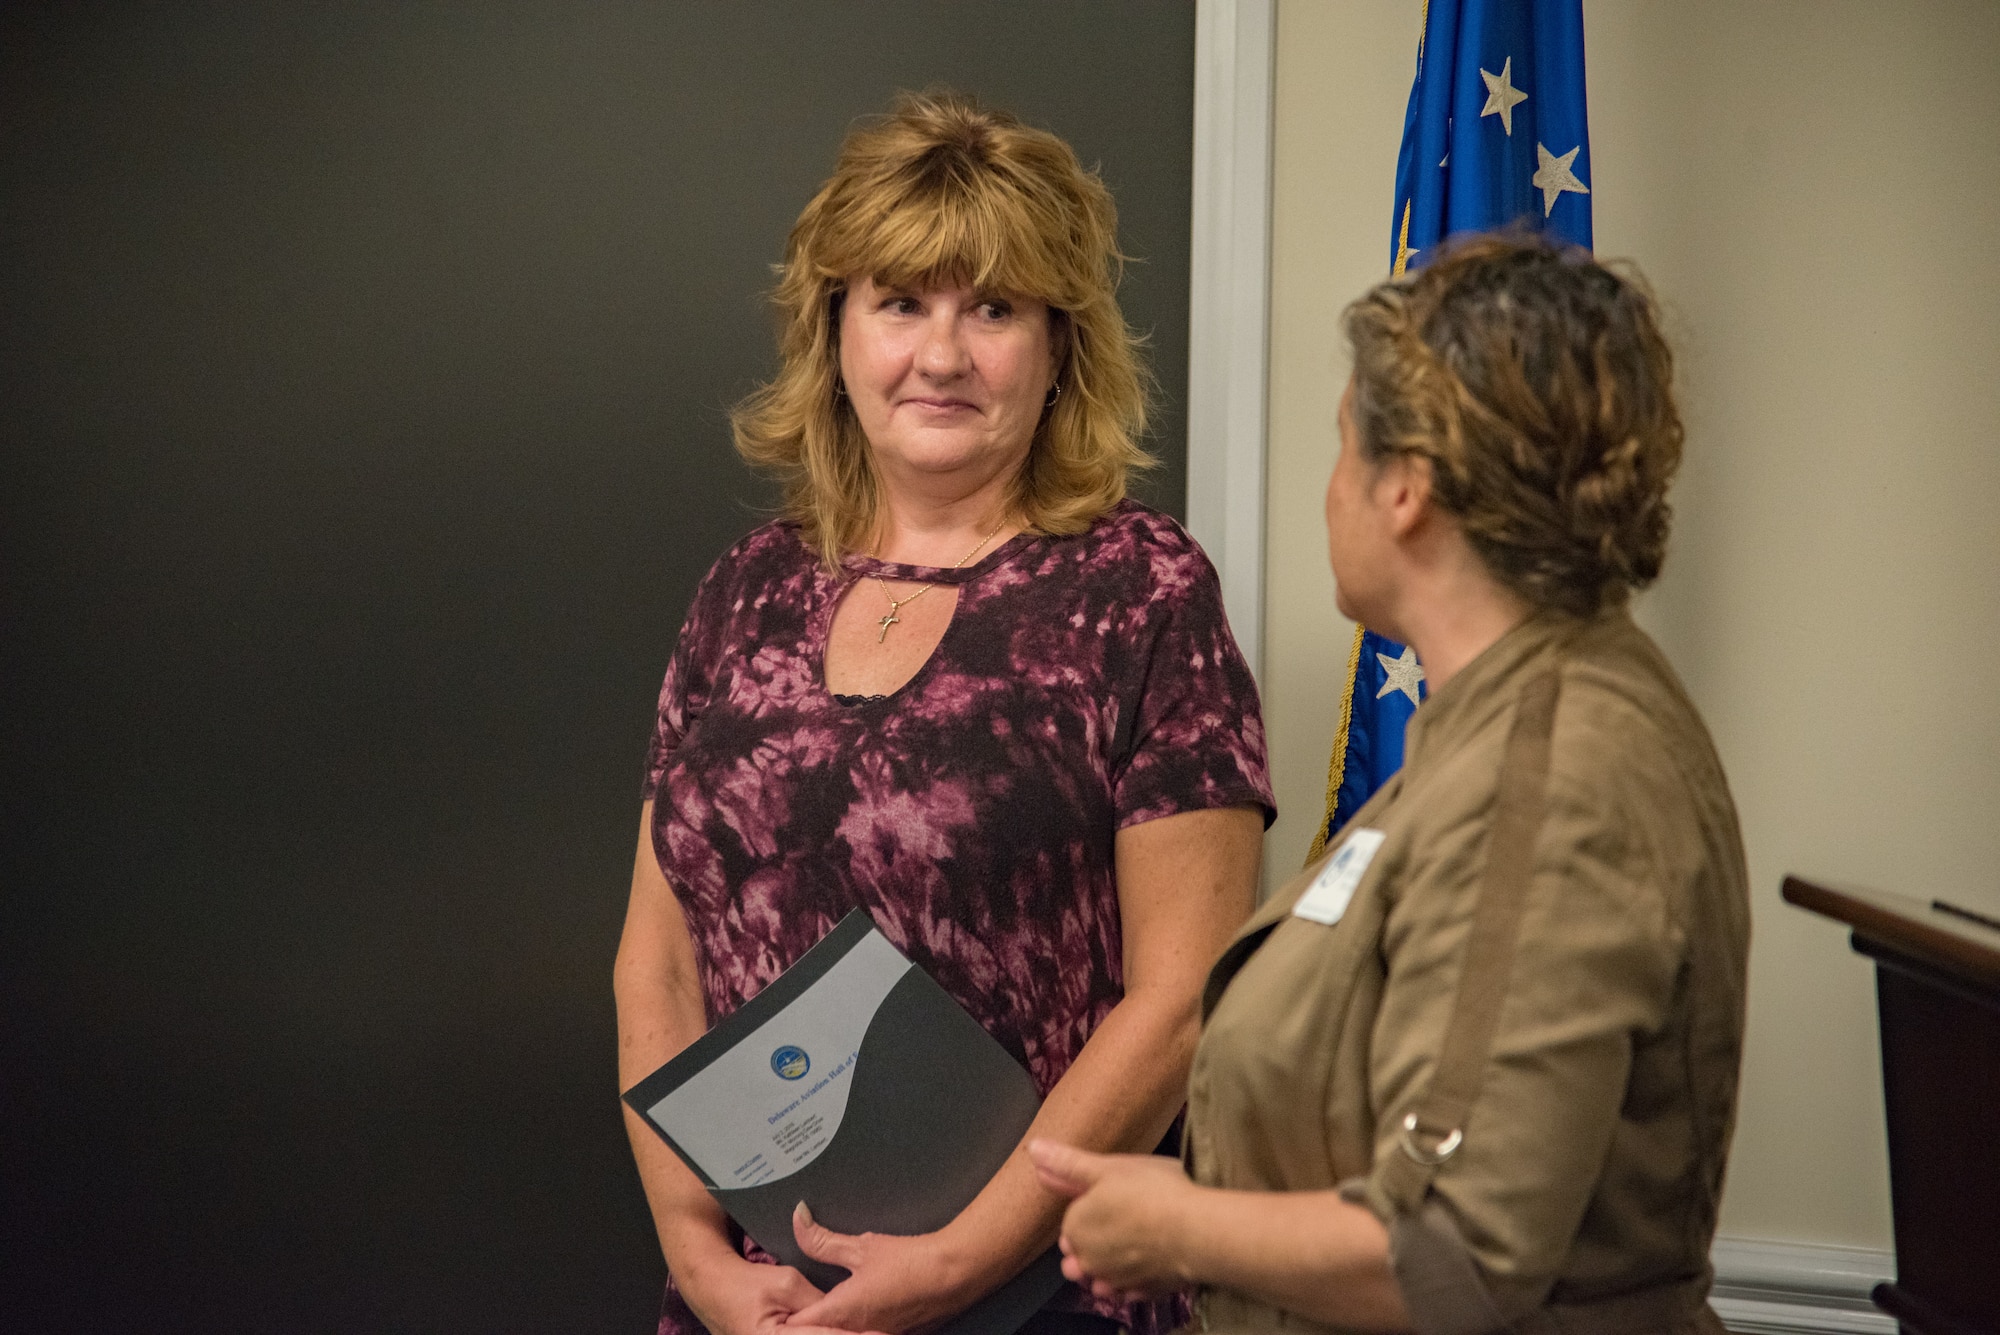 Rachel Anderson, a Delaware Aviation Hall of Fame trustee, right, speaks to retired Senior Master Sgt. Kathleen Lambert, a former 512th Airlift Wing loadmaster, left, during a Delaware Aviation Hall of Fame inductee notification at Dover Air Force Base, Del., Aug. 3, 2018. Anderson traveled to Dover AFB to deliver Lambert's official inductee letter. (U.S. Air Force photo by Staff Sgt. Damien Taylor)